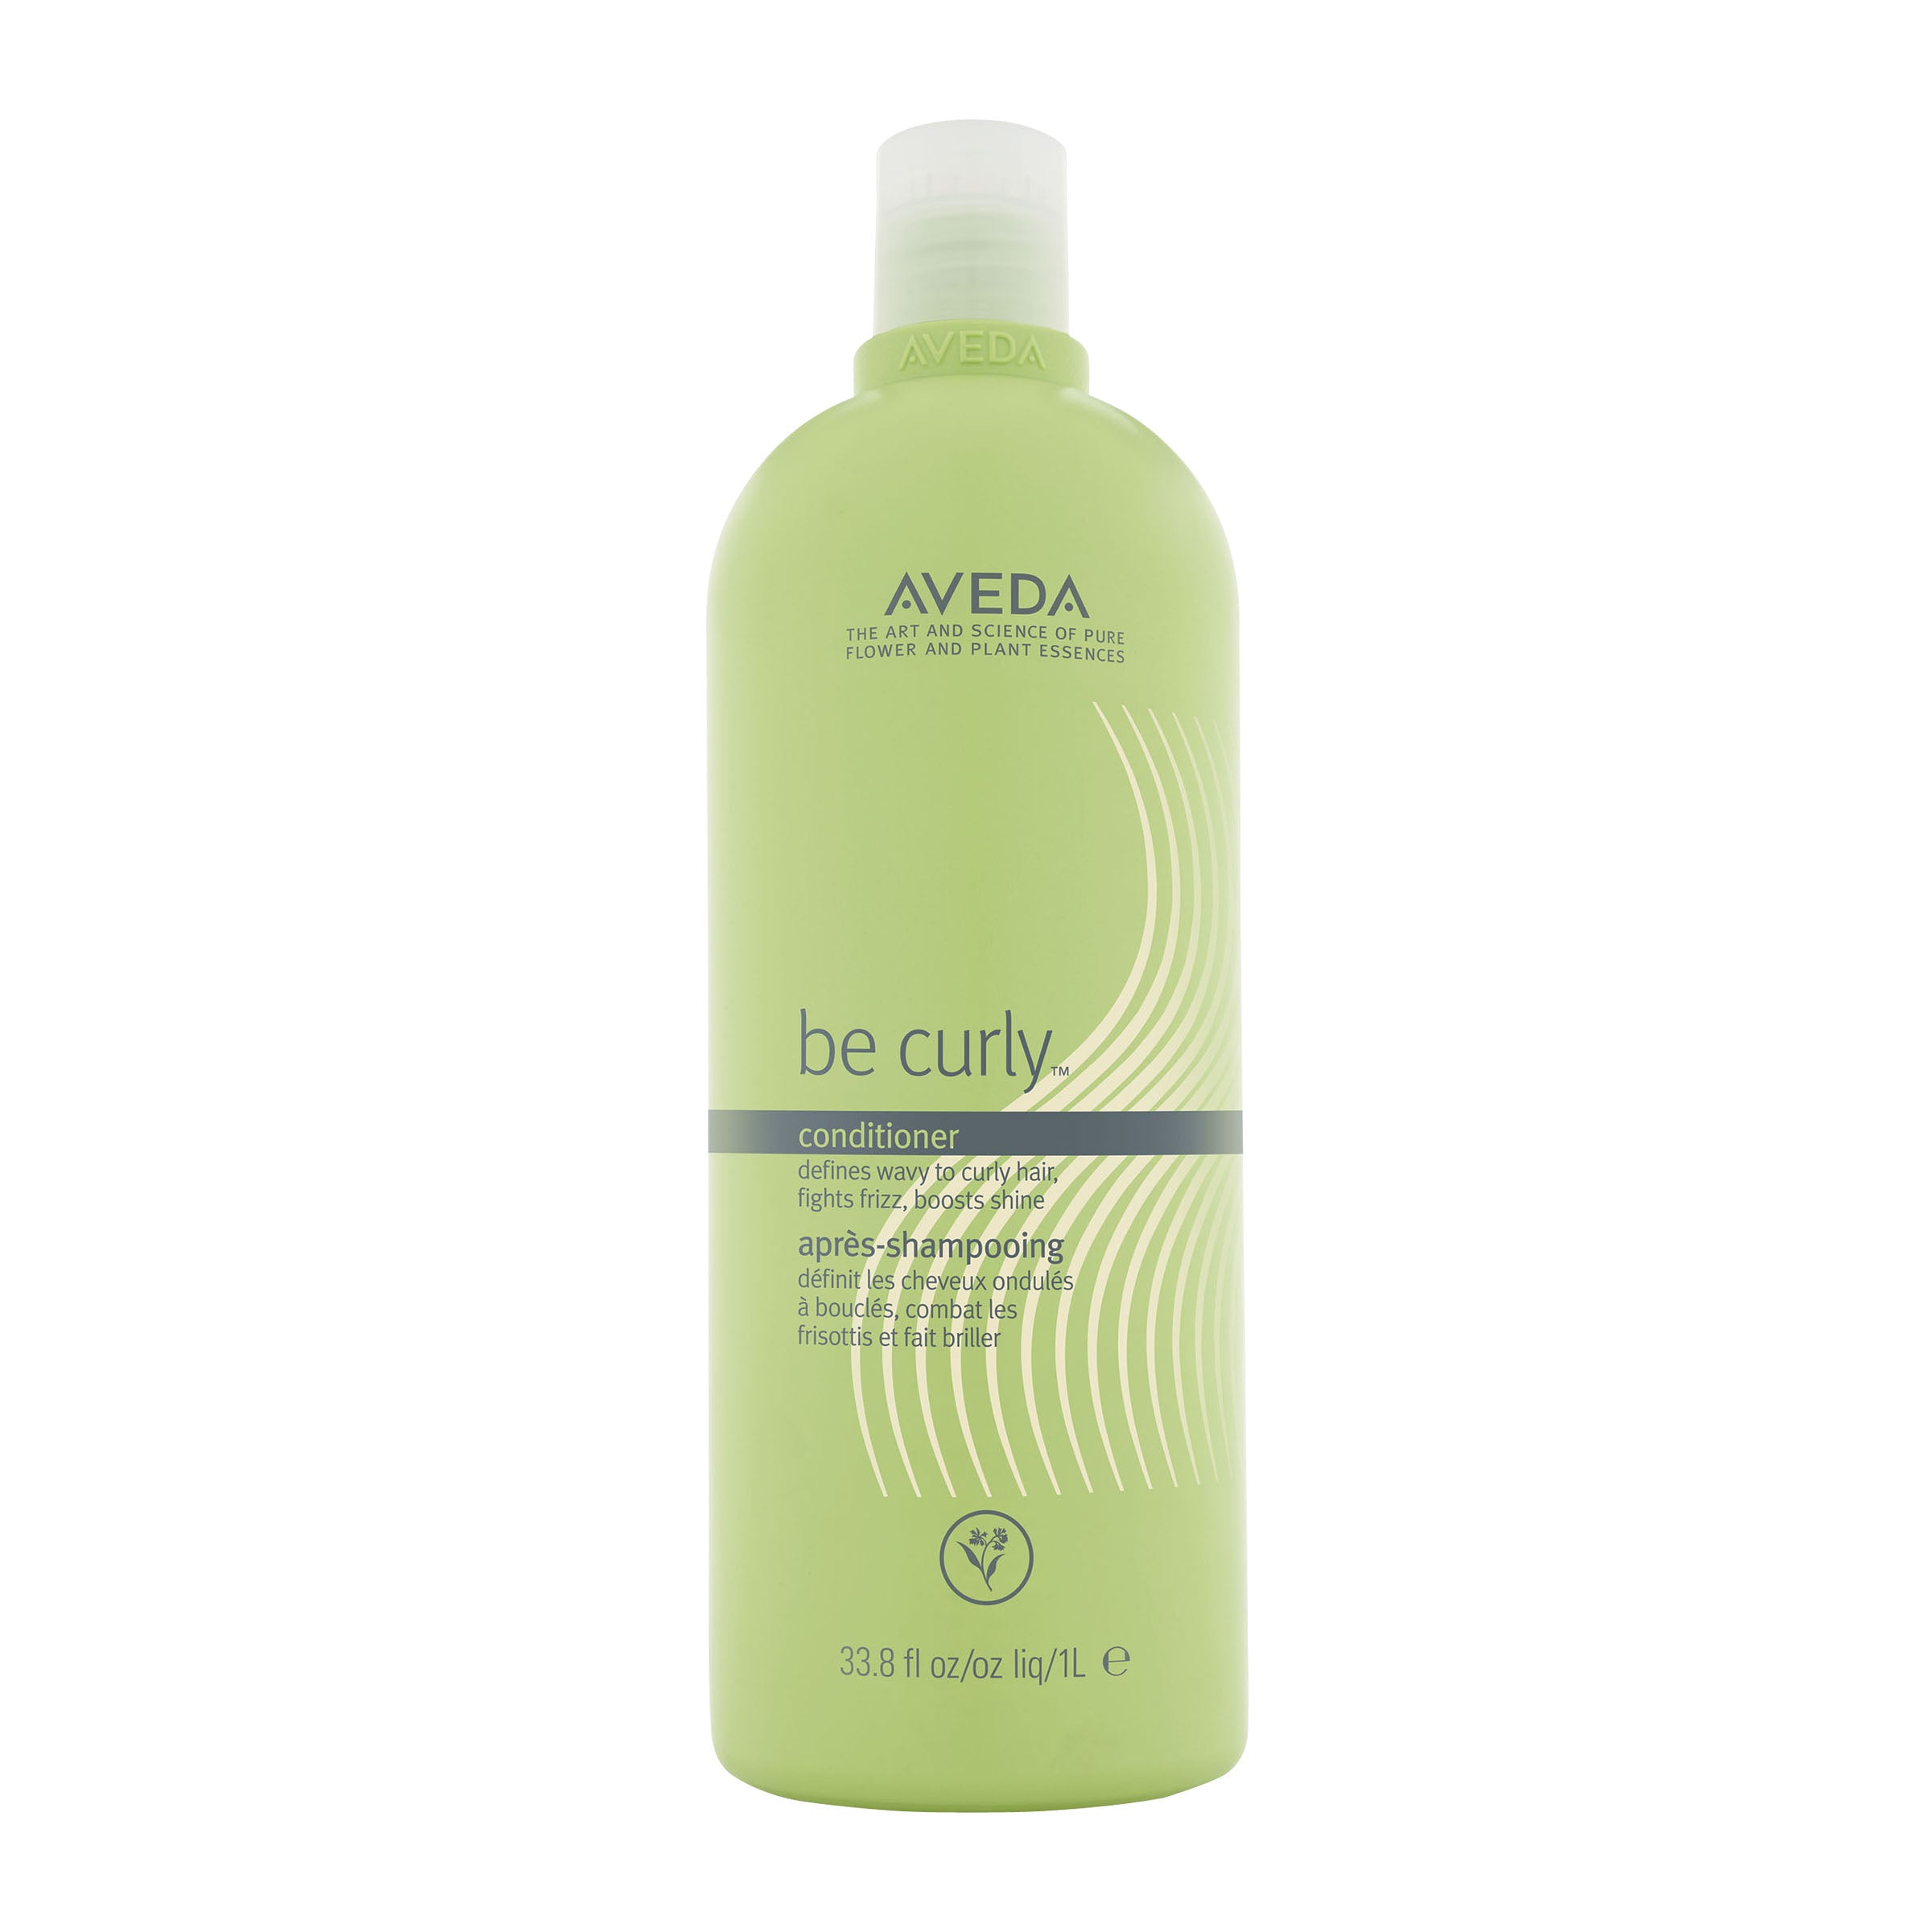 Aveda aveda be curly™ conditioner - 1 litre